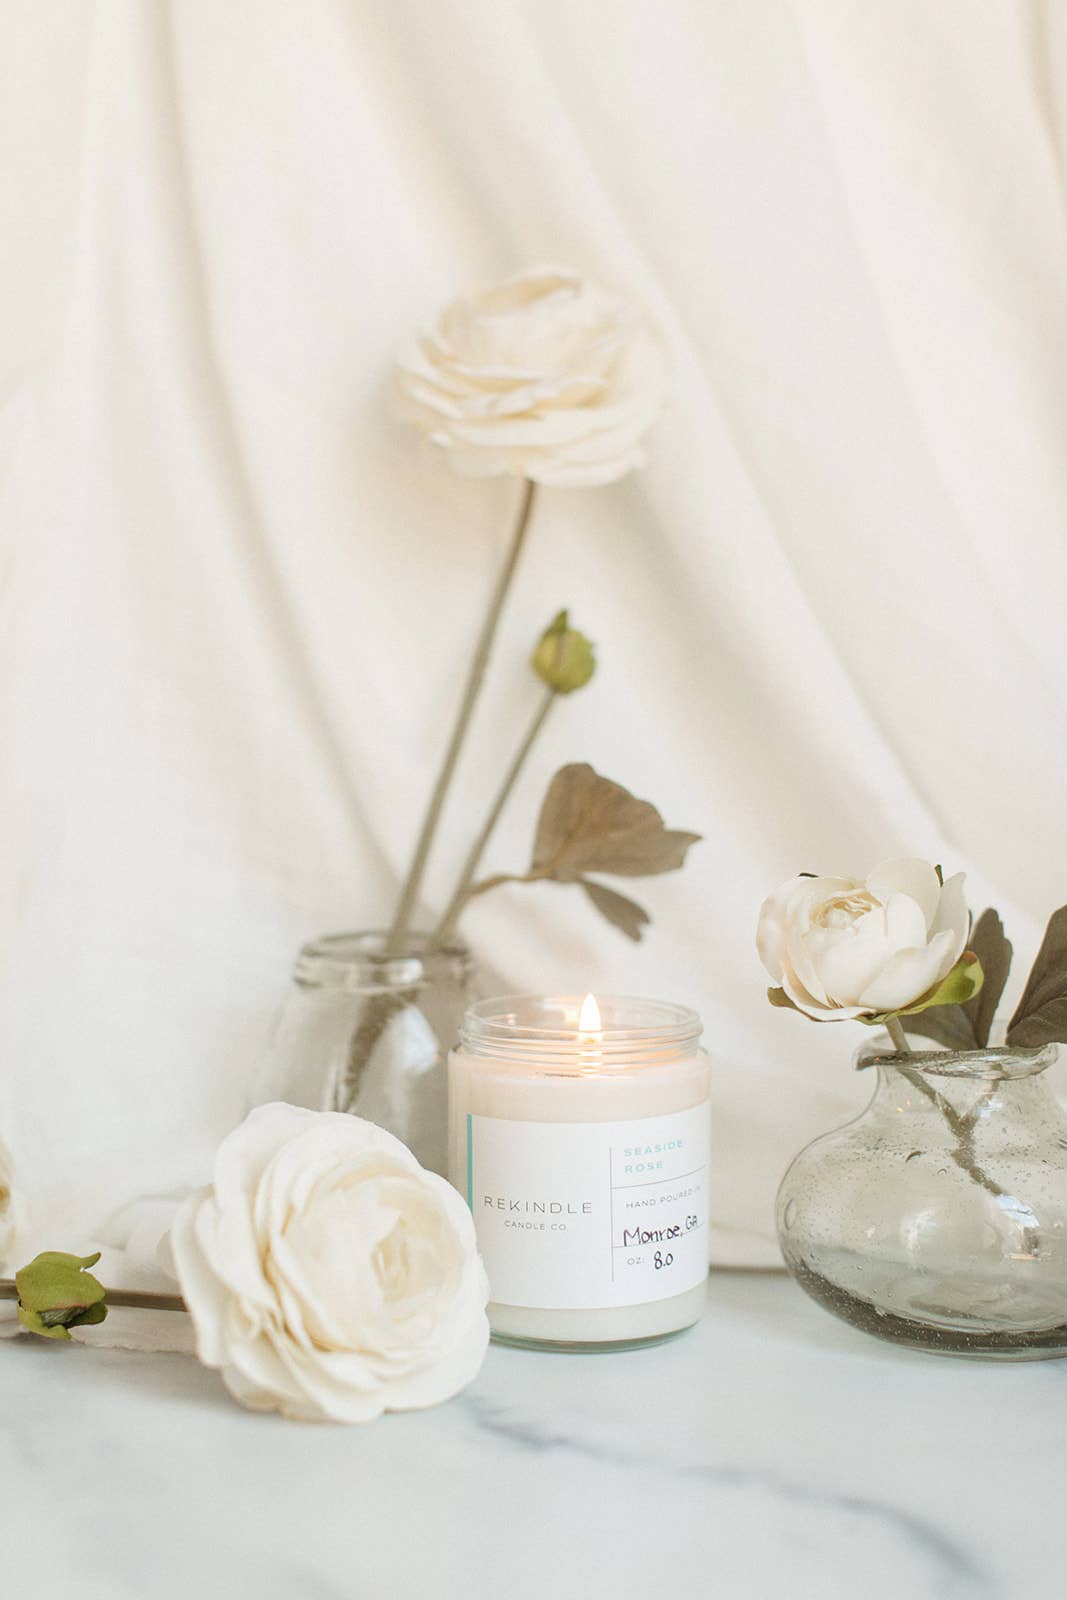 Seaside Rose Cotton Wick Soy Candle